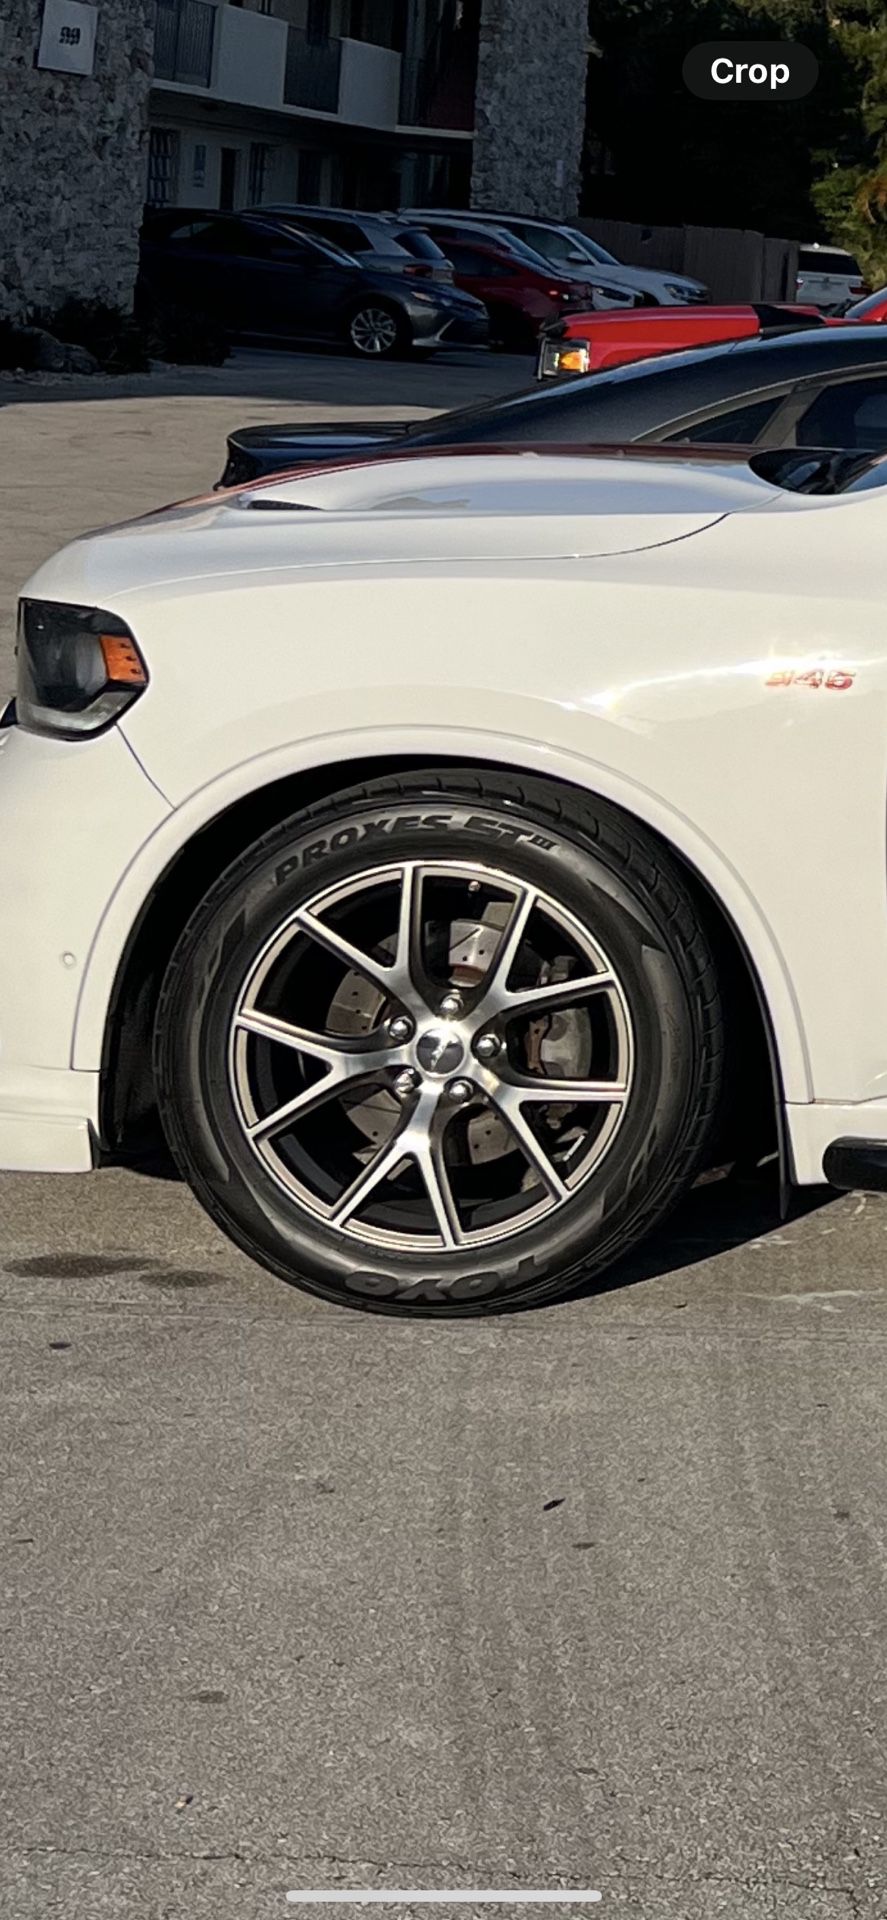 Polished Trackhawk Wheels No Tires Only Rims 